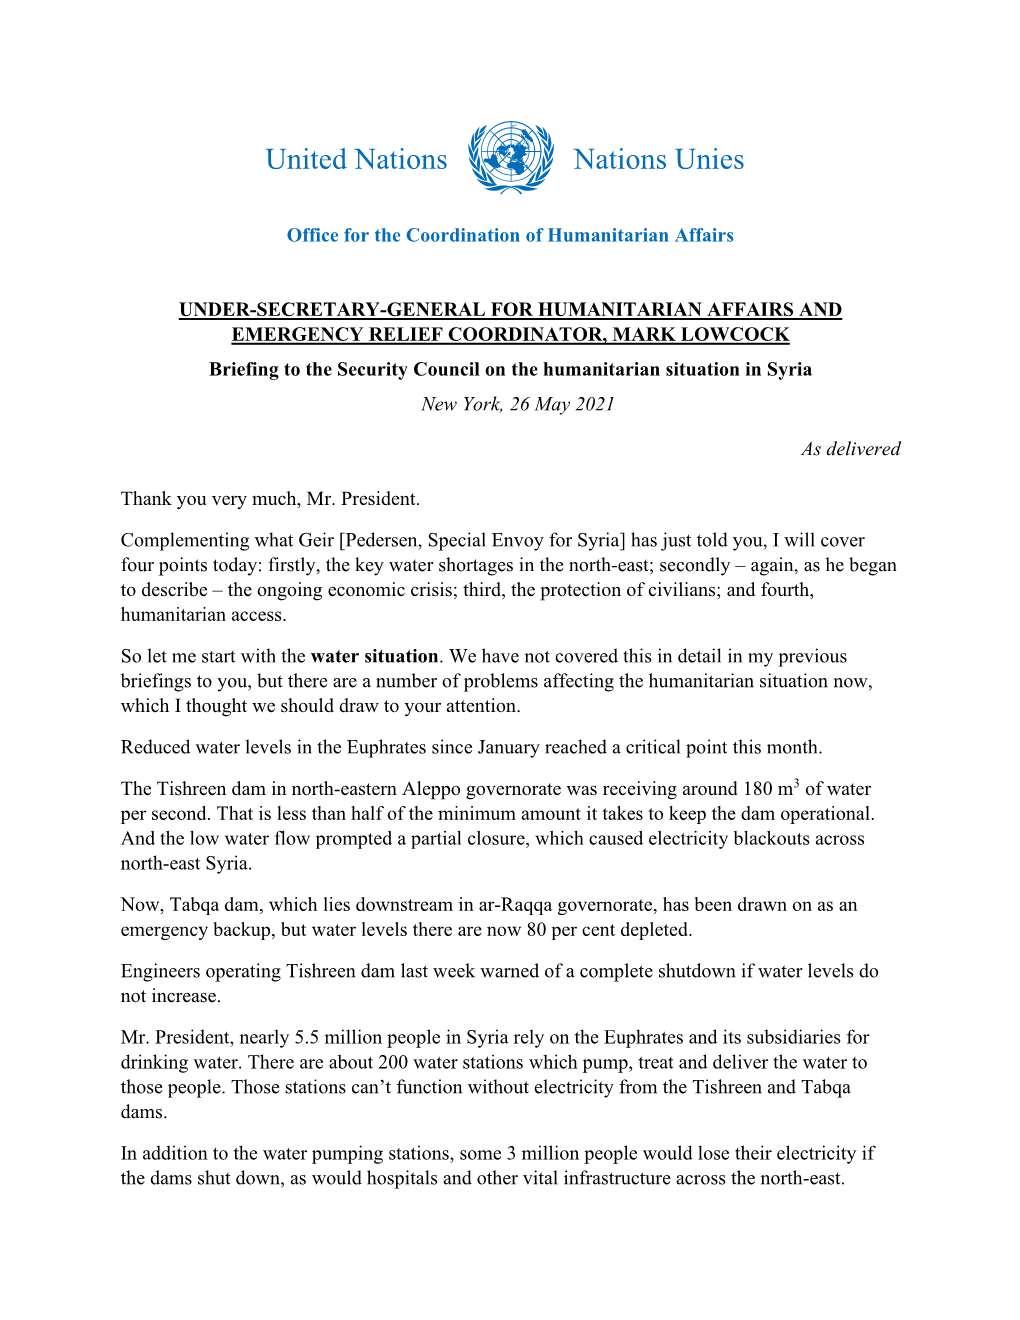 Briefing to the Security Council on the Humanitarian Situation in Syria New York, 26 May 2021